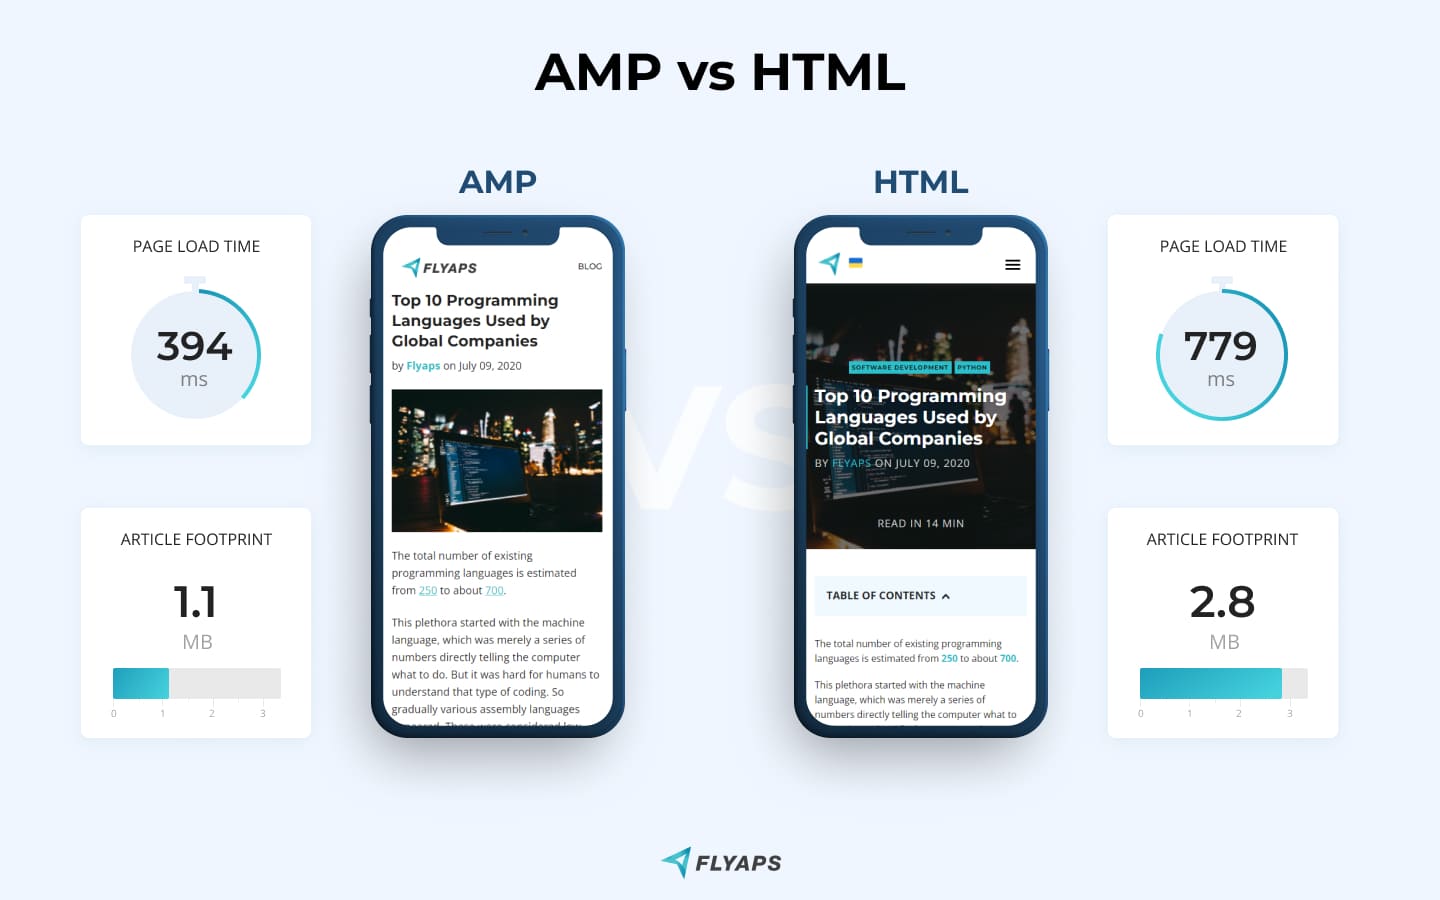 AMP versus HTML page load time